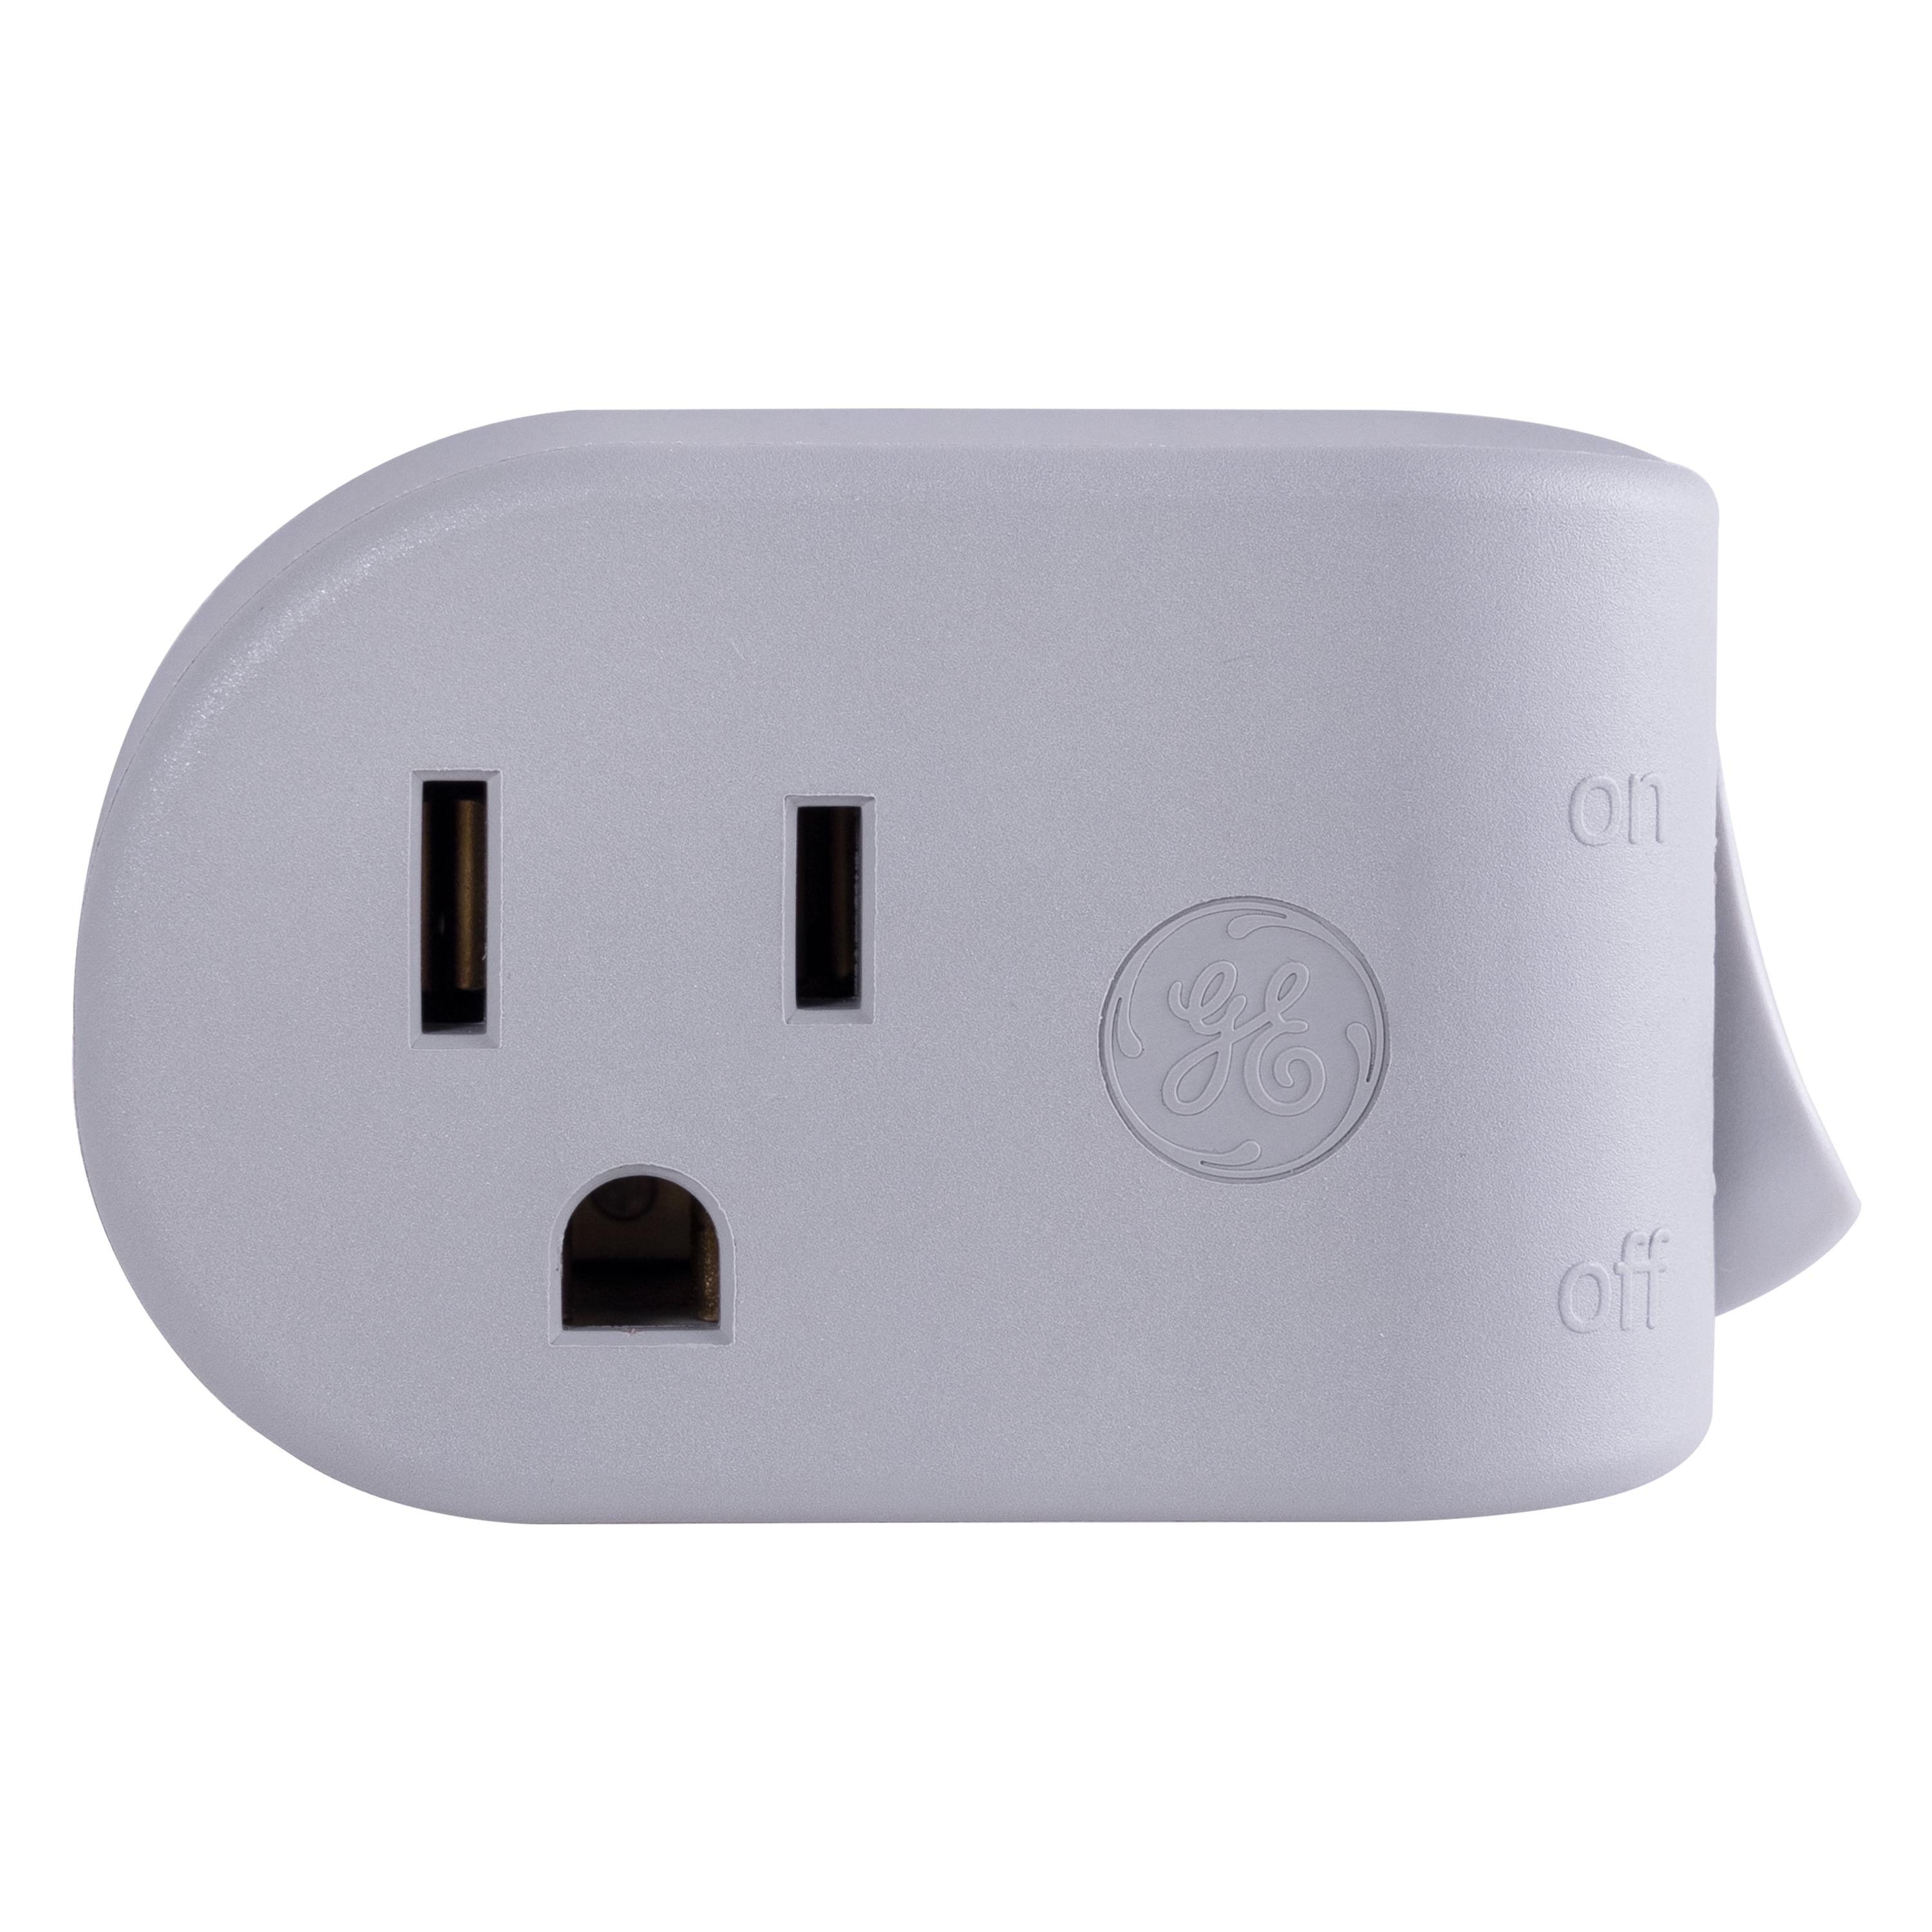 GE On/Off Plug-In Power Switch, Gray